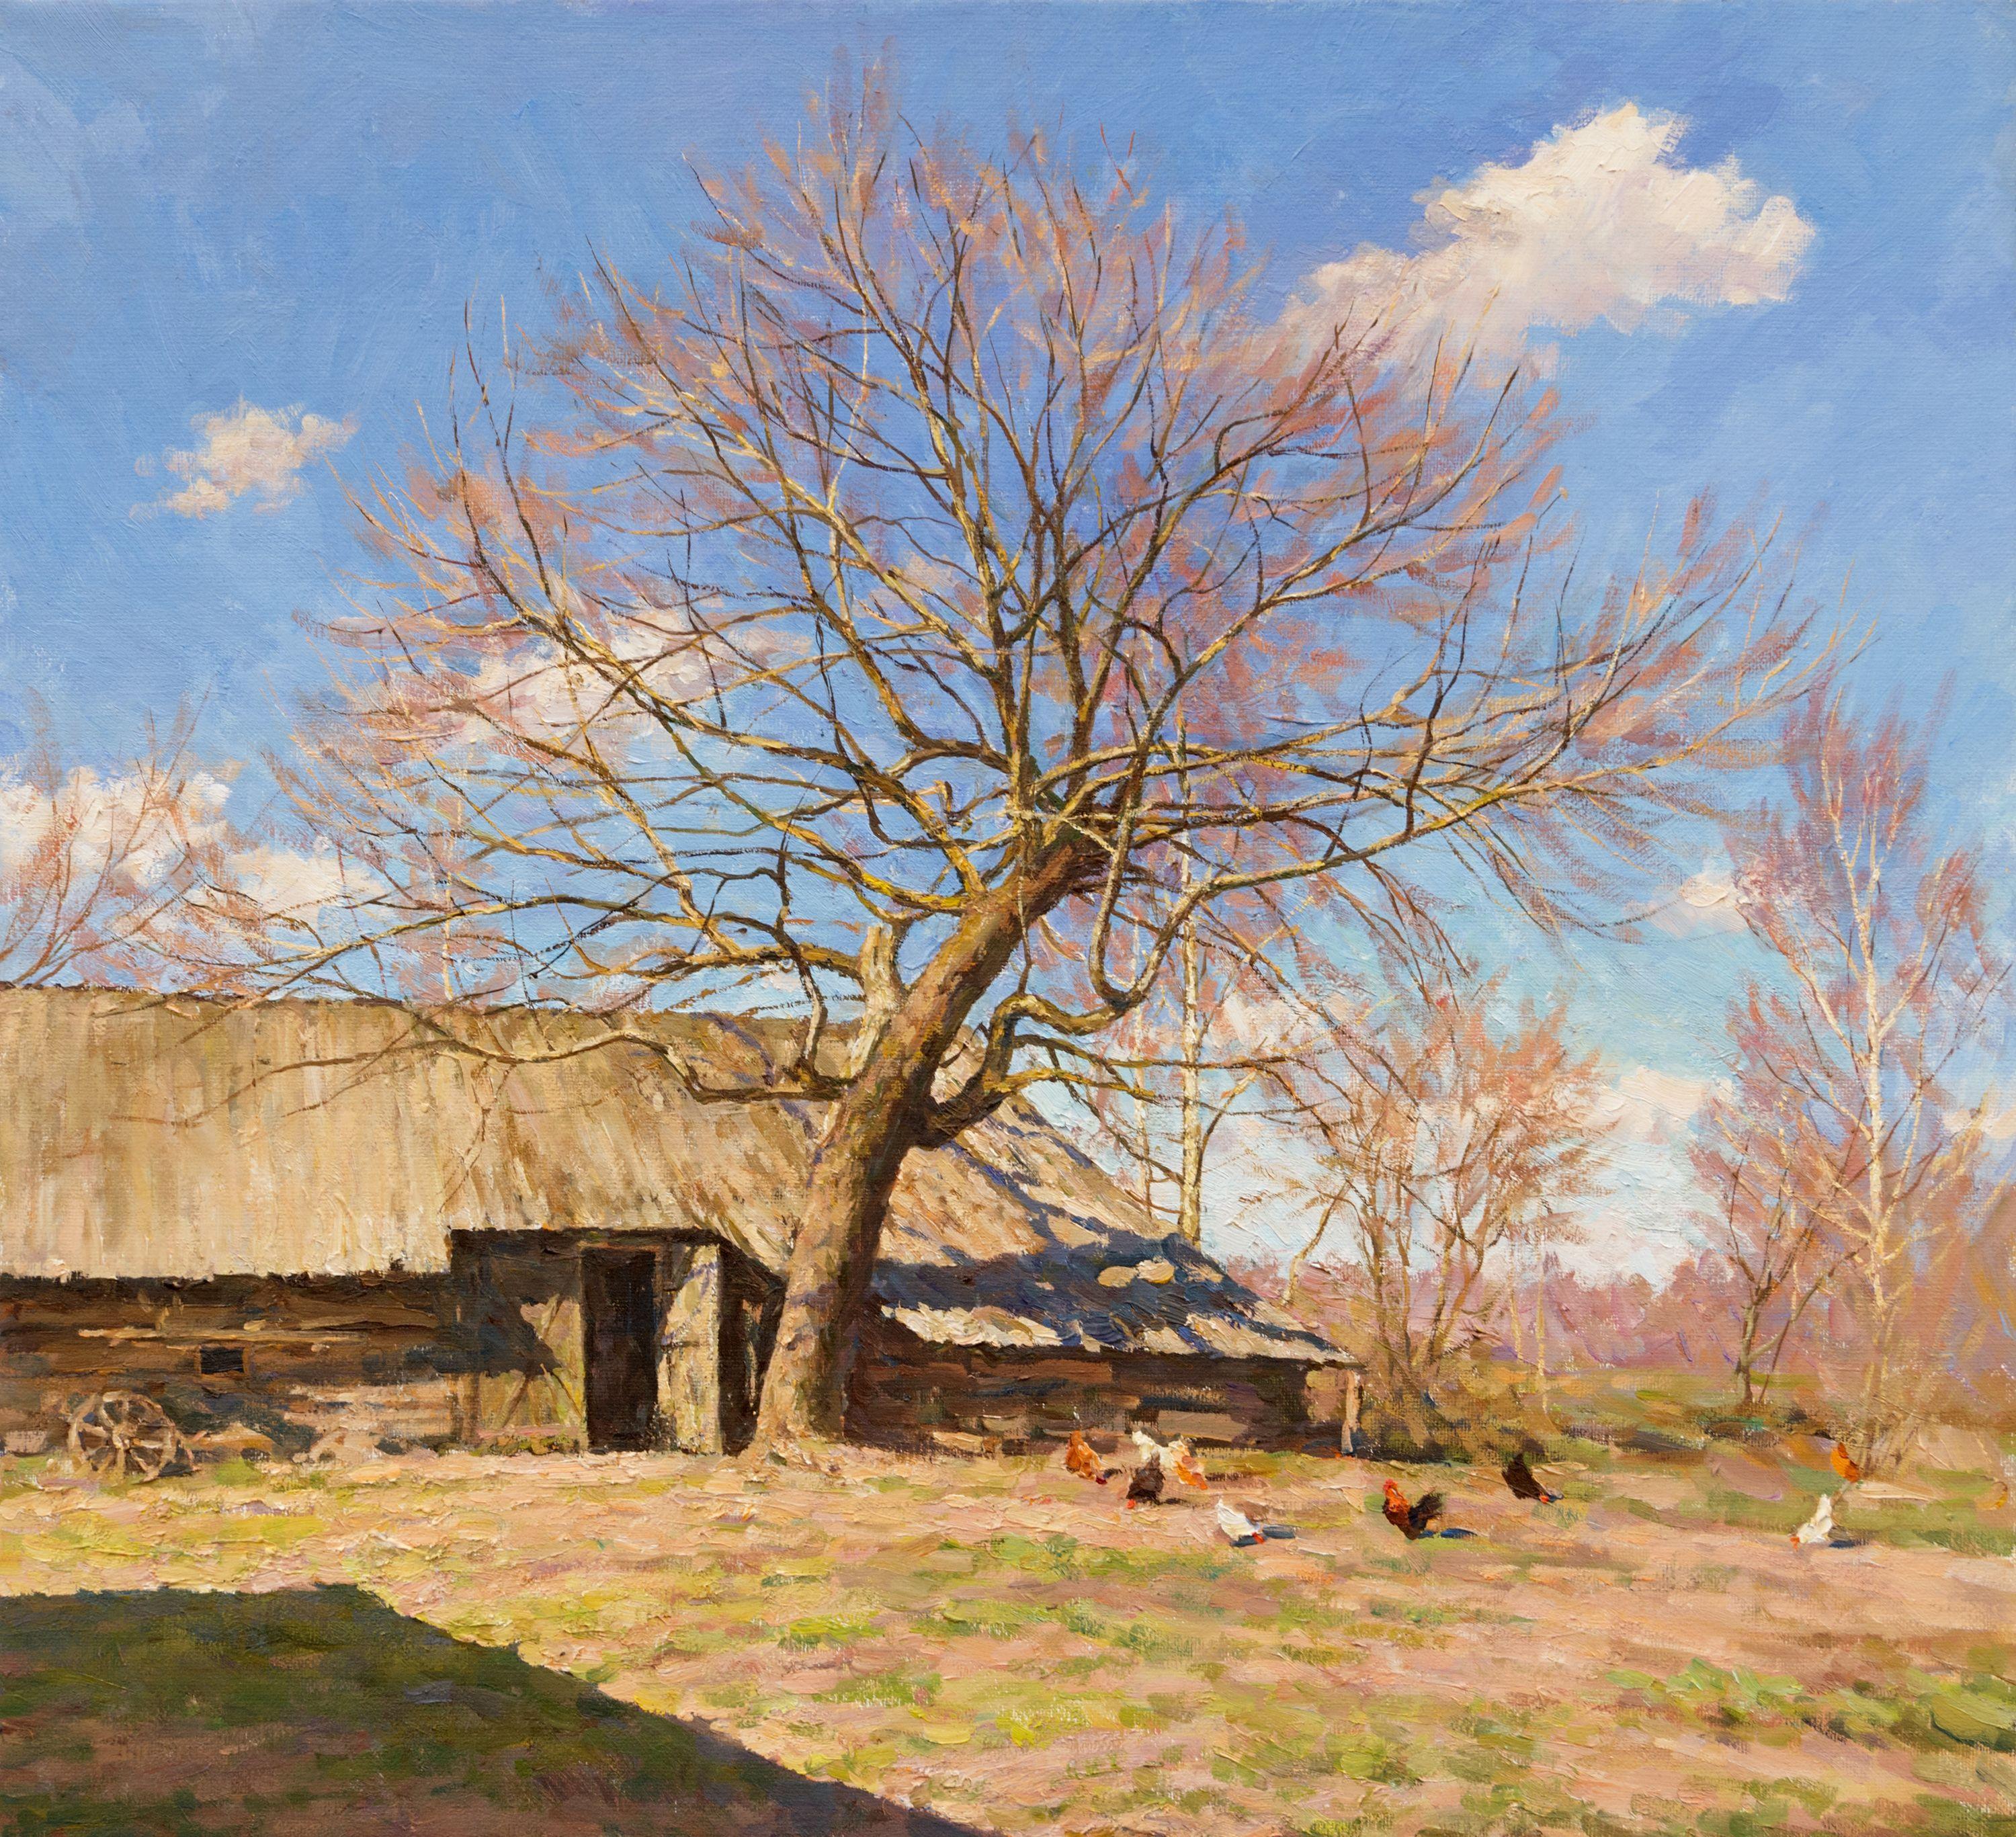 Title: Early Spring;  Year created: 2020;  Medium and support: Oil on canvas;  Dimensions: h 55 cm Ã— w 60 cm Ã— d 3 cm. :: Painting :: Realism :: This piece comes with an official certificate of authenticity signed by the artist :: Ready to Hang: